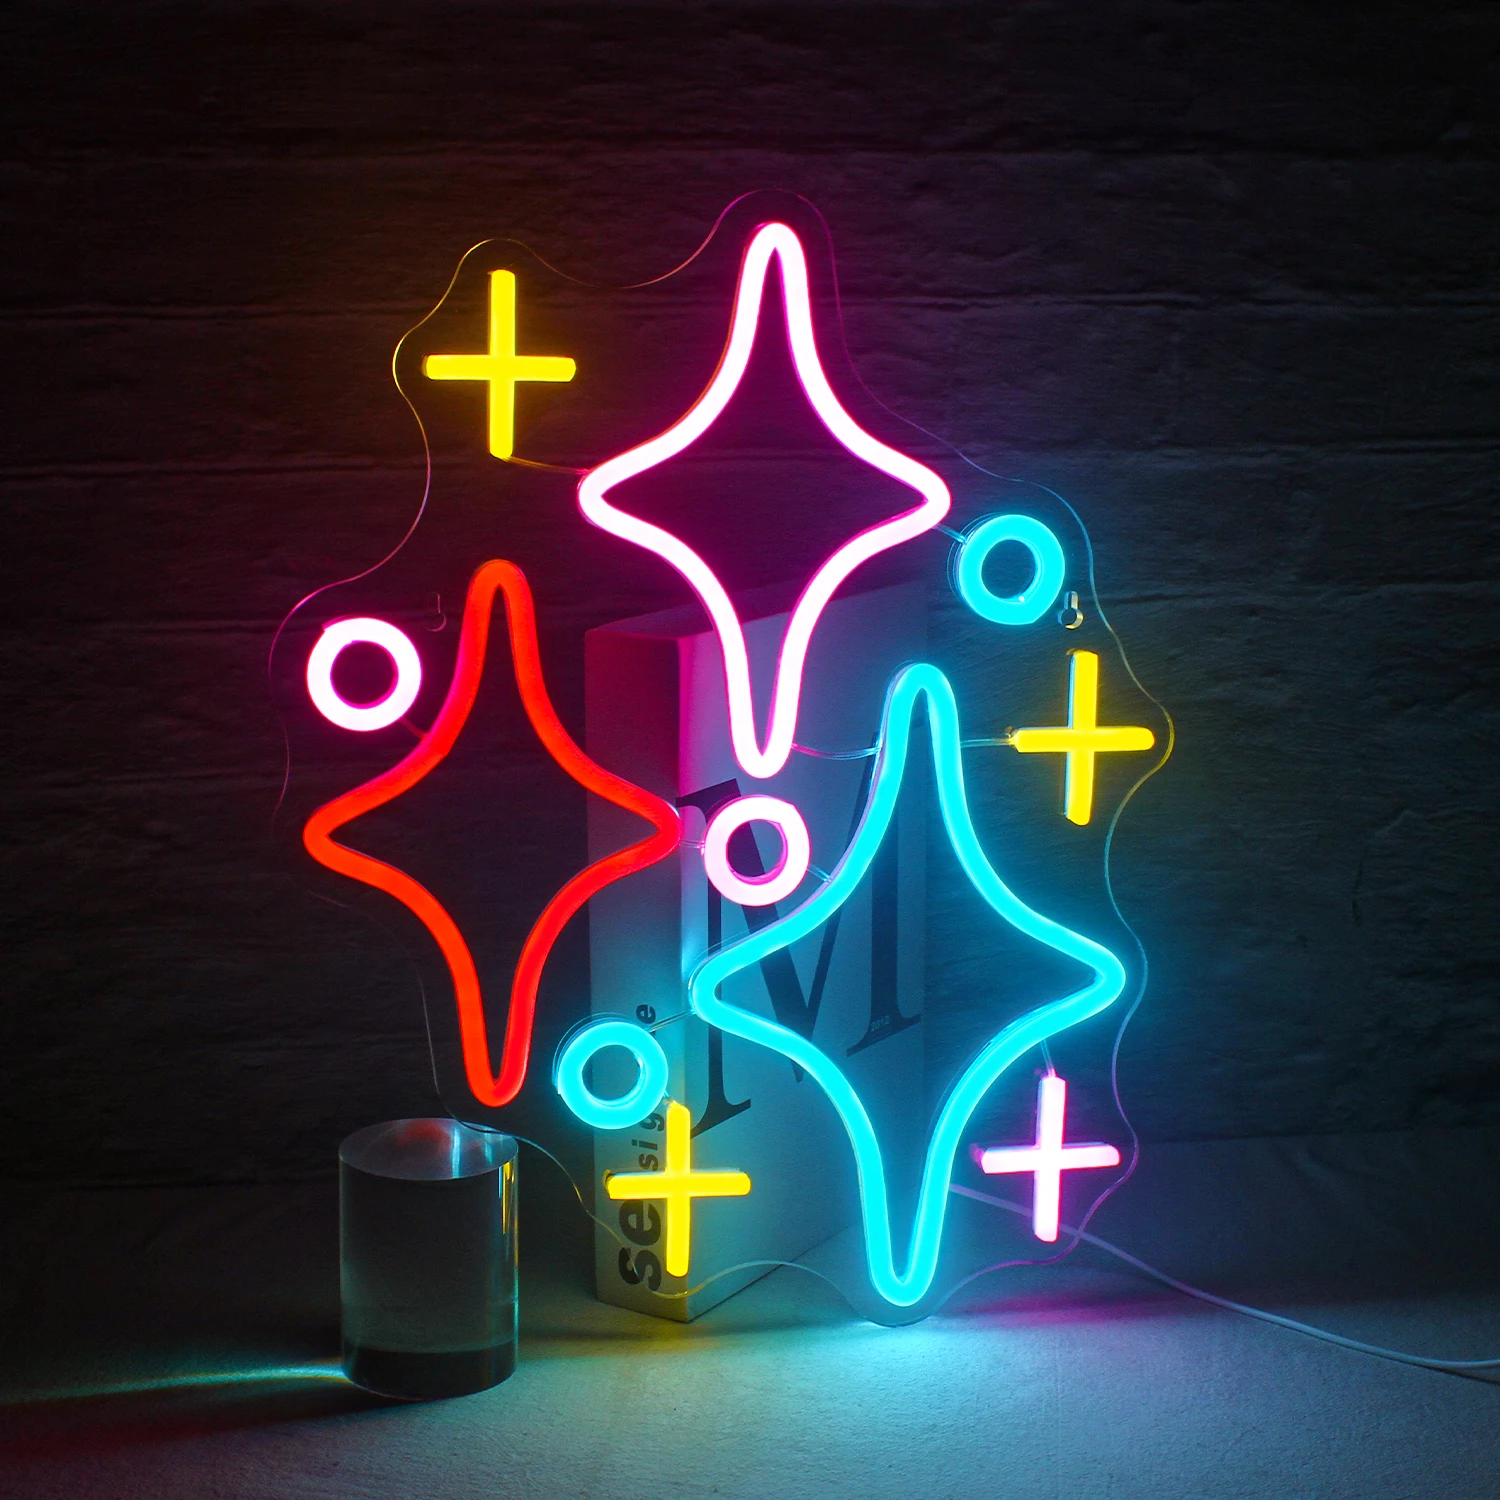 Stars Neon Sign Led Shine Star Lights Neon Signs for Wall Decor USB Powered Game Room Family Birthday Bar Wedding Party Neon santa neon led sign christmas neon sign lighting family room bedroom wall decor holiday party night lights cool kids girls gifts